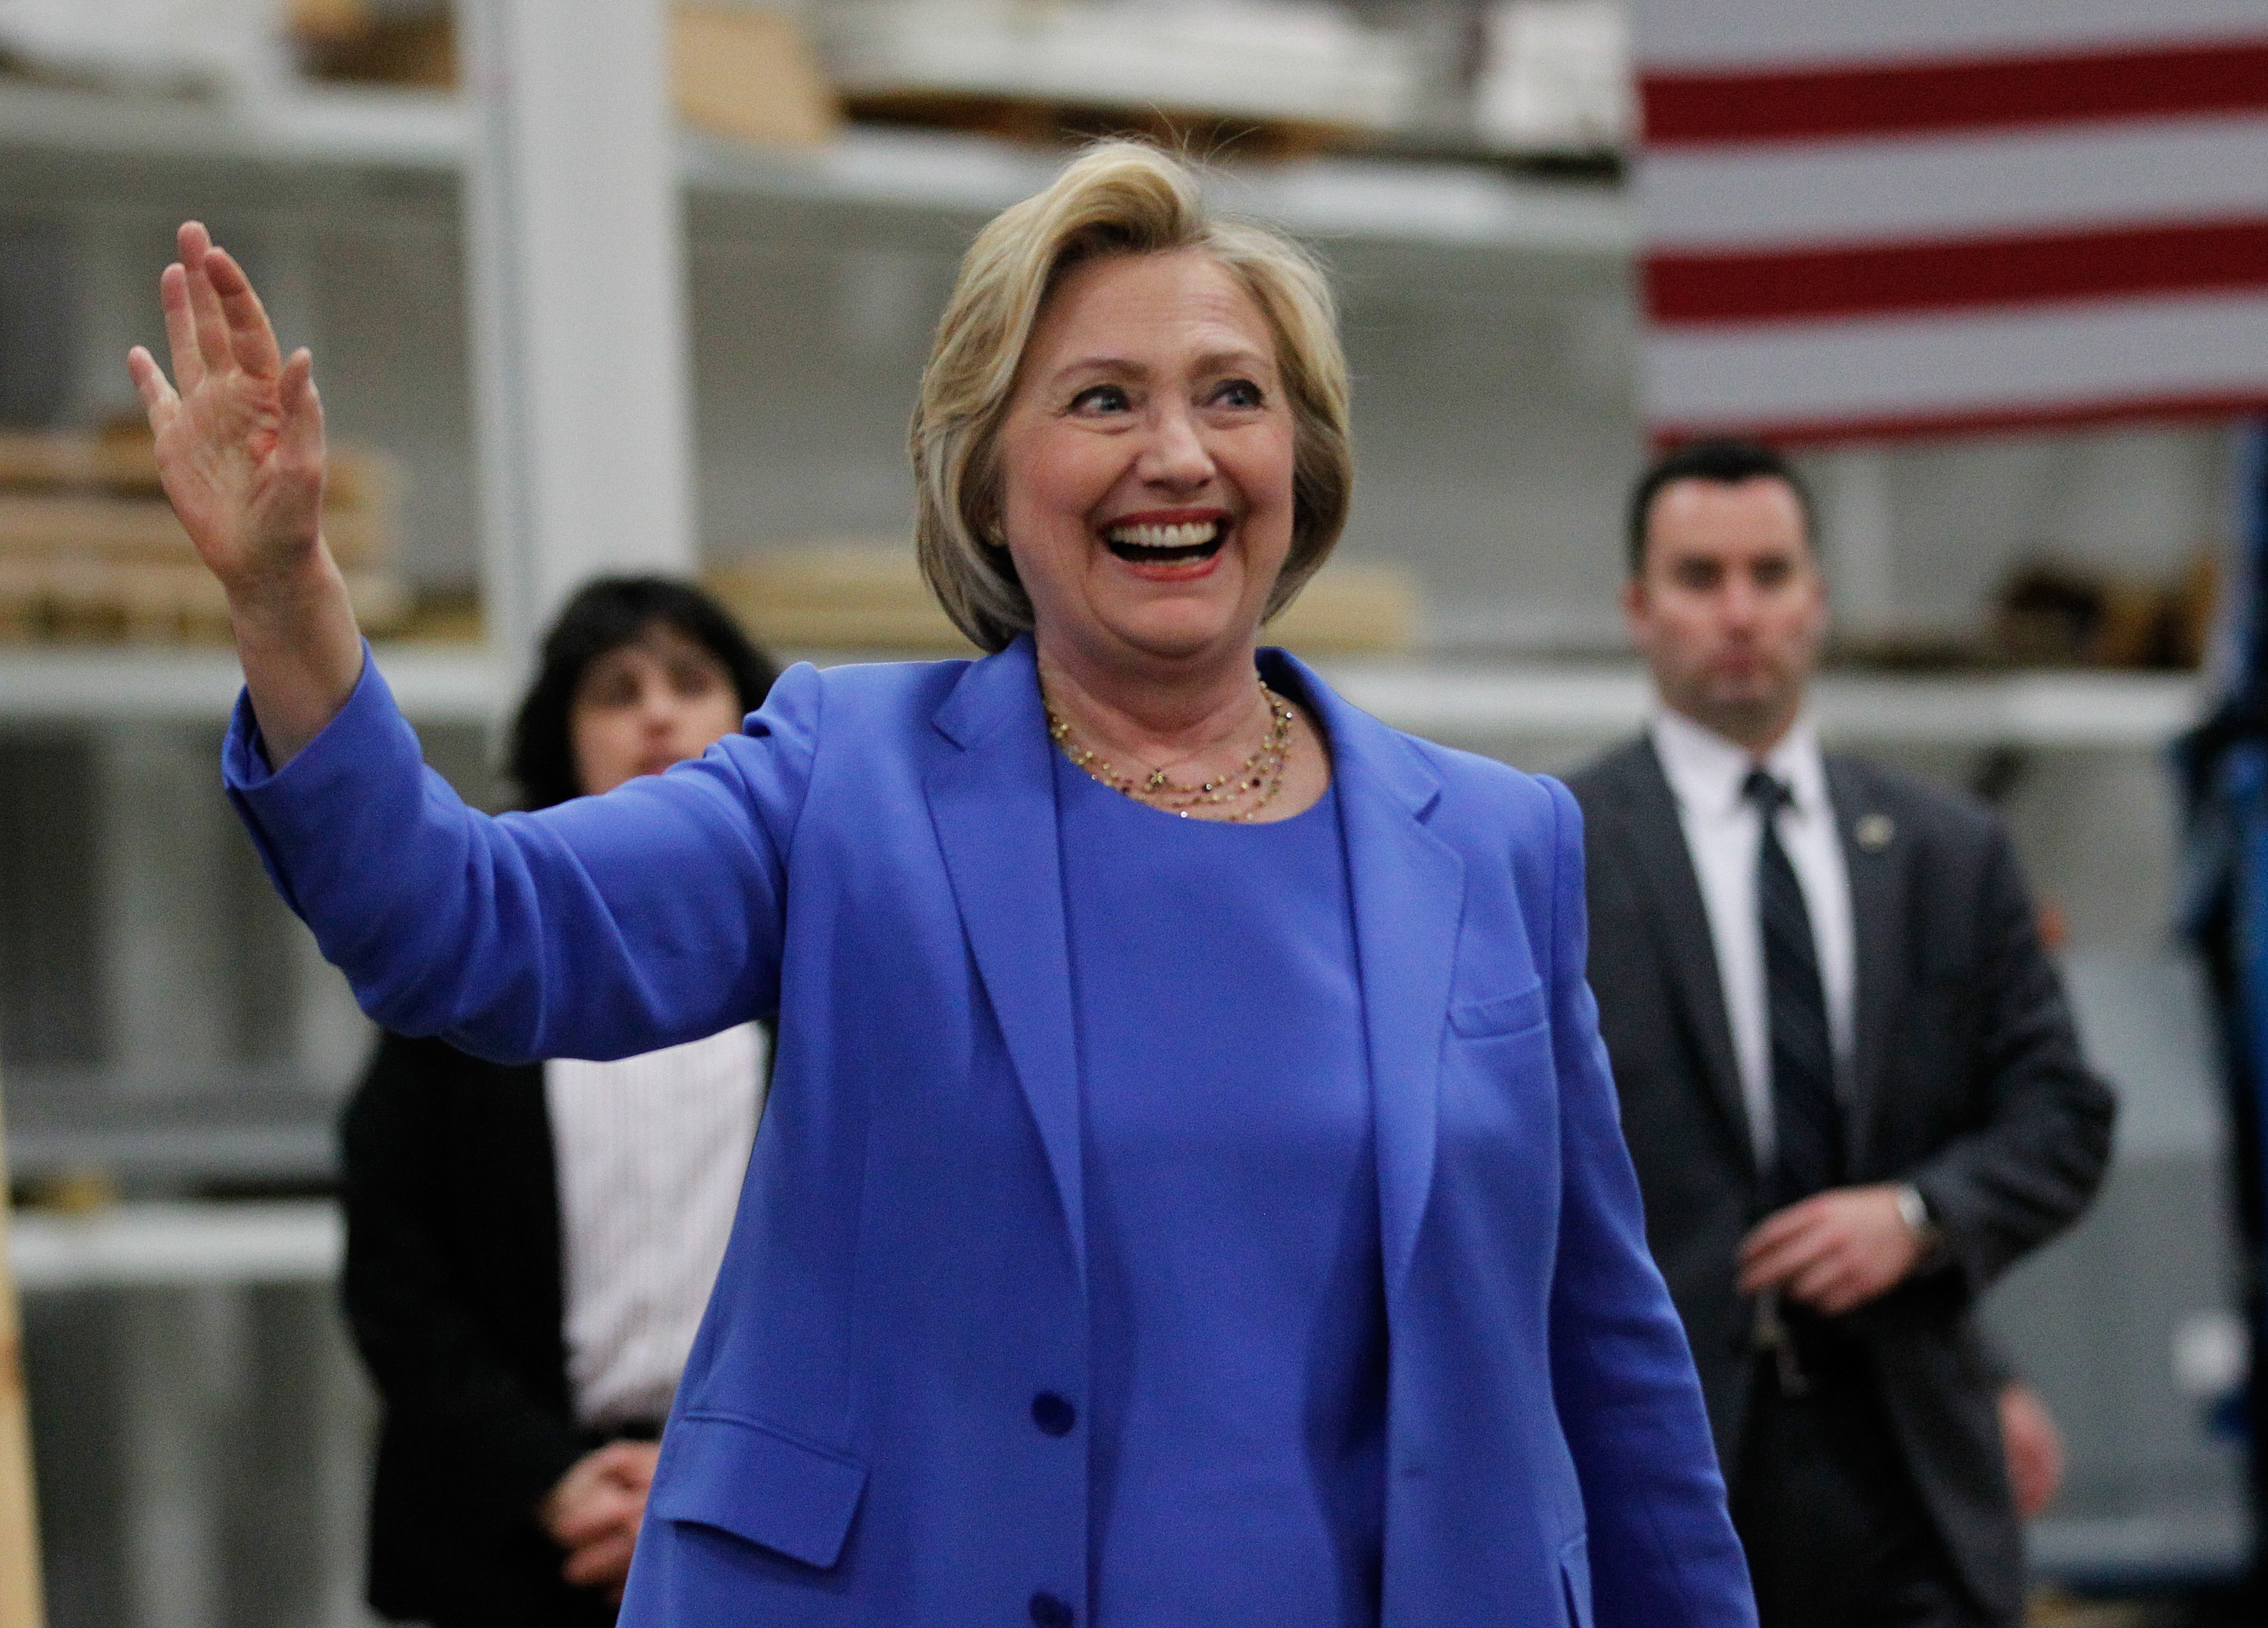 Democratic presidential candidate Hillary Clinton waves to the crowd during a campaign stop at the Union of Carpenters and Millwrights Training Center on May 15 in Louisville, Kentucky. (John Sommers II/Getty Images)